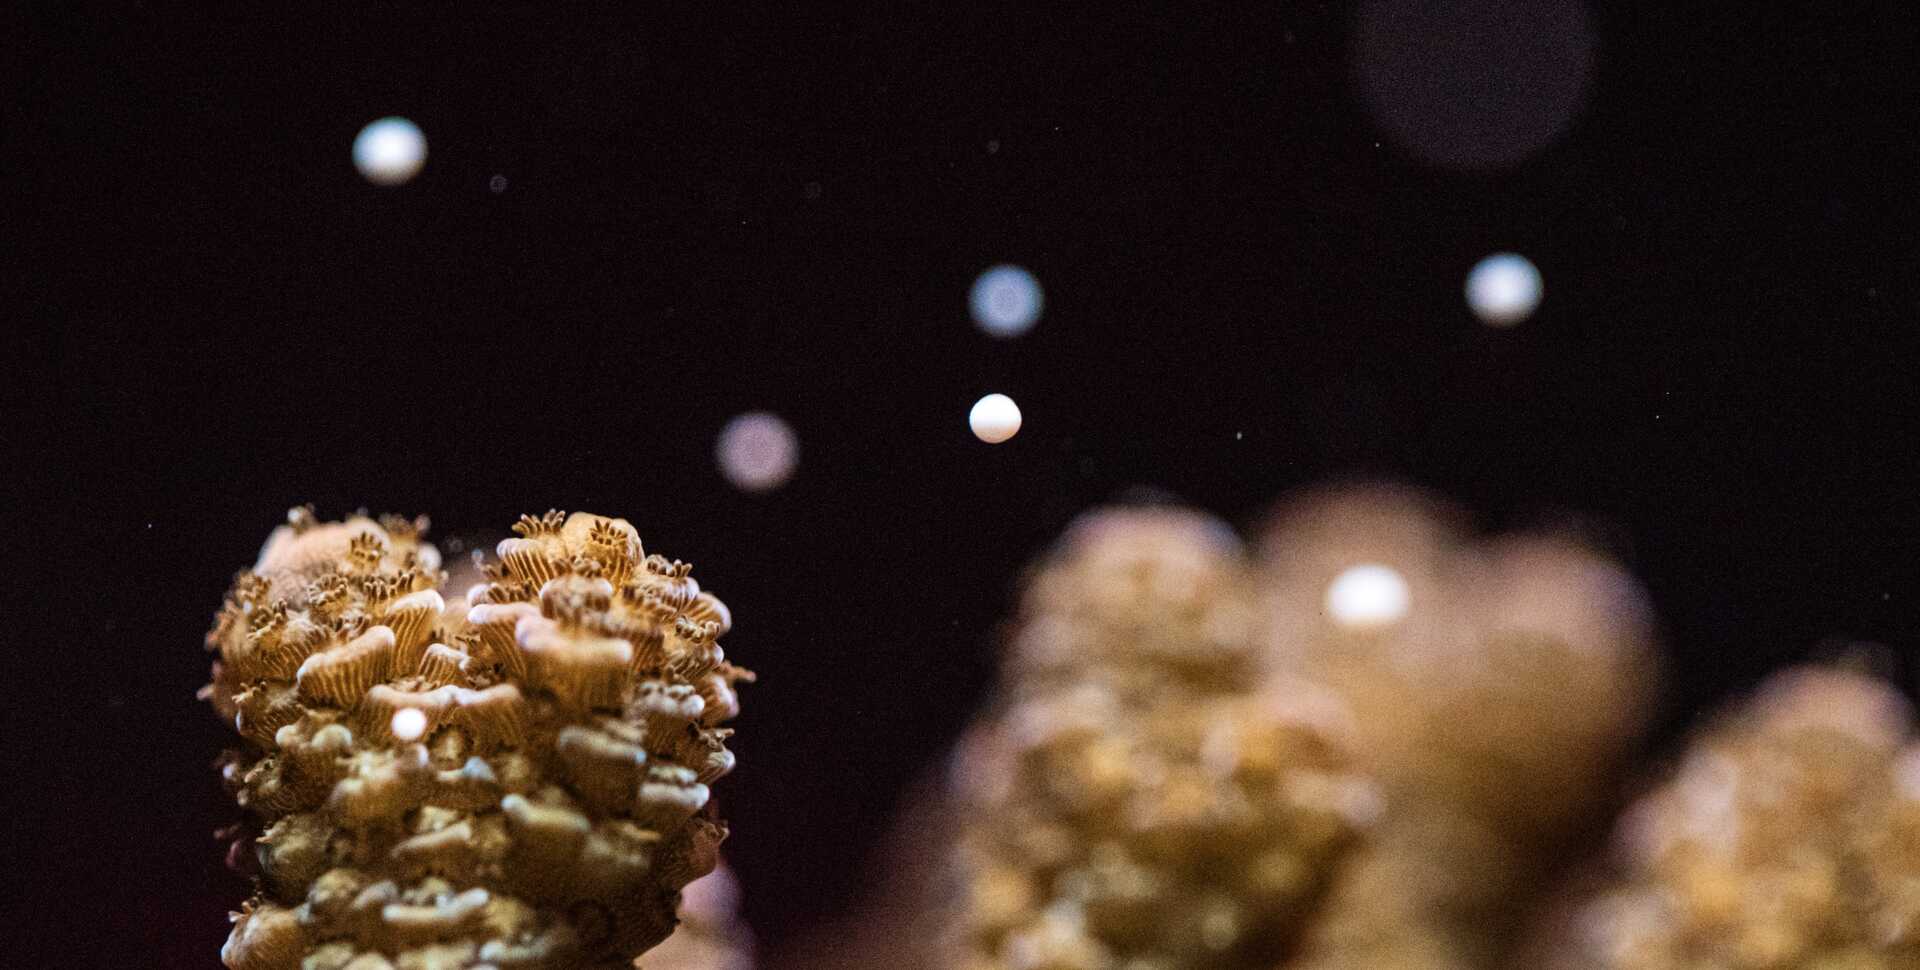 Acropora corals releasing gametes in the Academy's Coral Regeneration Lab during a spawning event. Photo by Gayle Laird